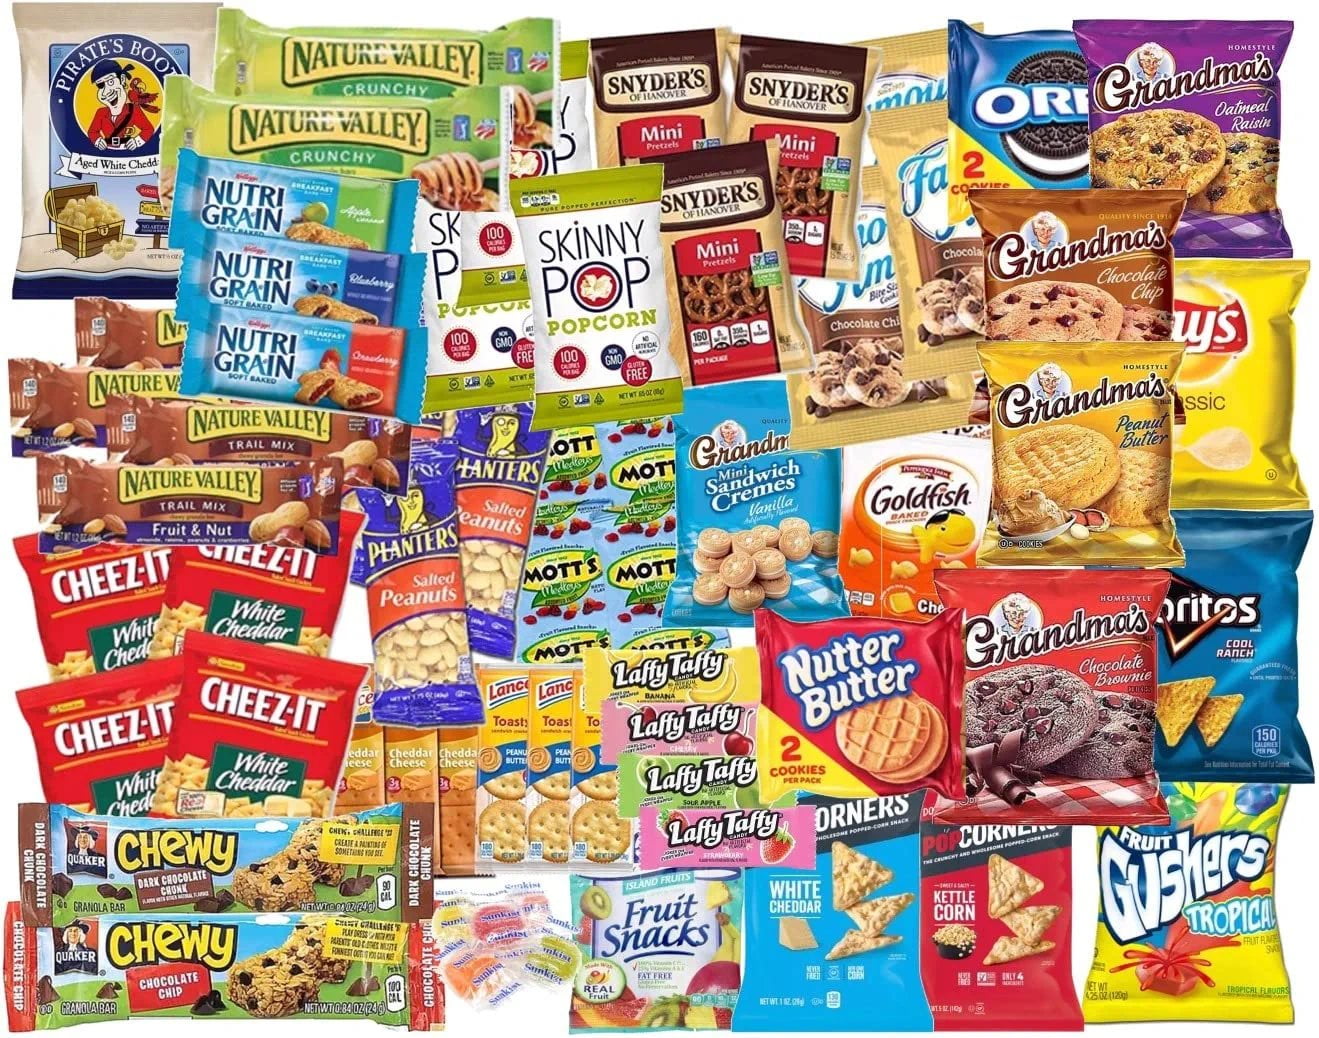 Fun Flavors Box Nut Free Diet Healthy Snack Care Package - 45 Snacks  Variety Assortment of Chips, Cookies, Candy, Bars, Snacks Gift Box